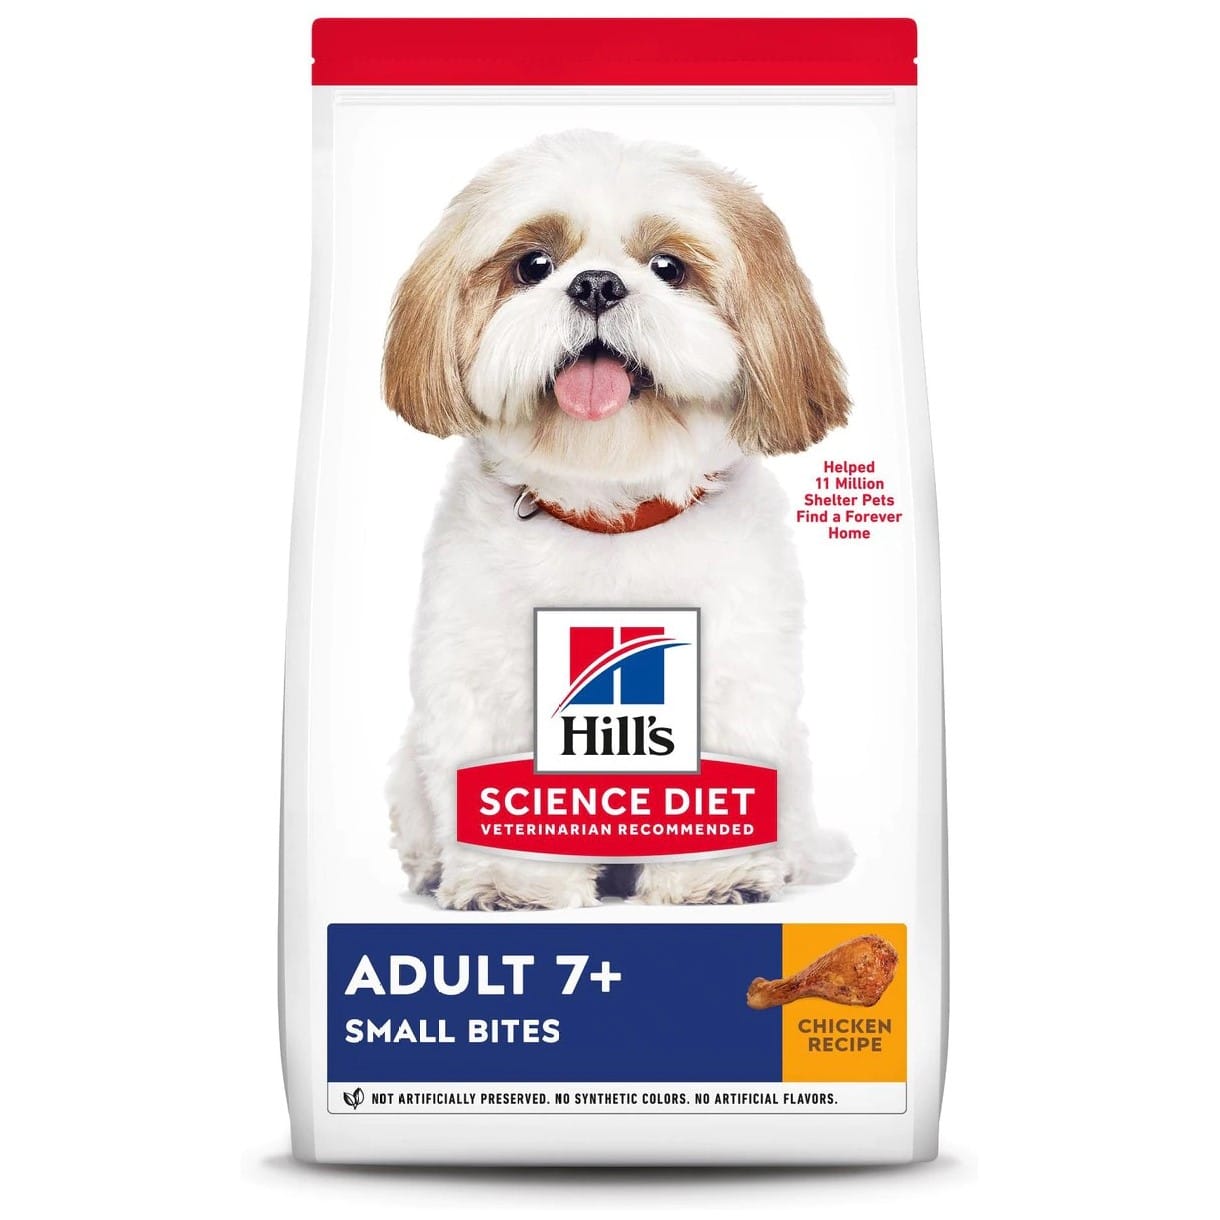 Hill's Science Diet Adult 7+ Small Bites Chicken Meal, Barley & Rice Recipe Dry Dog Food